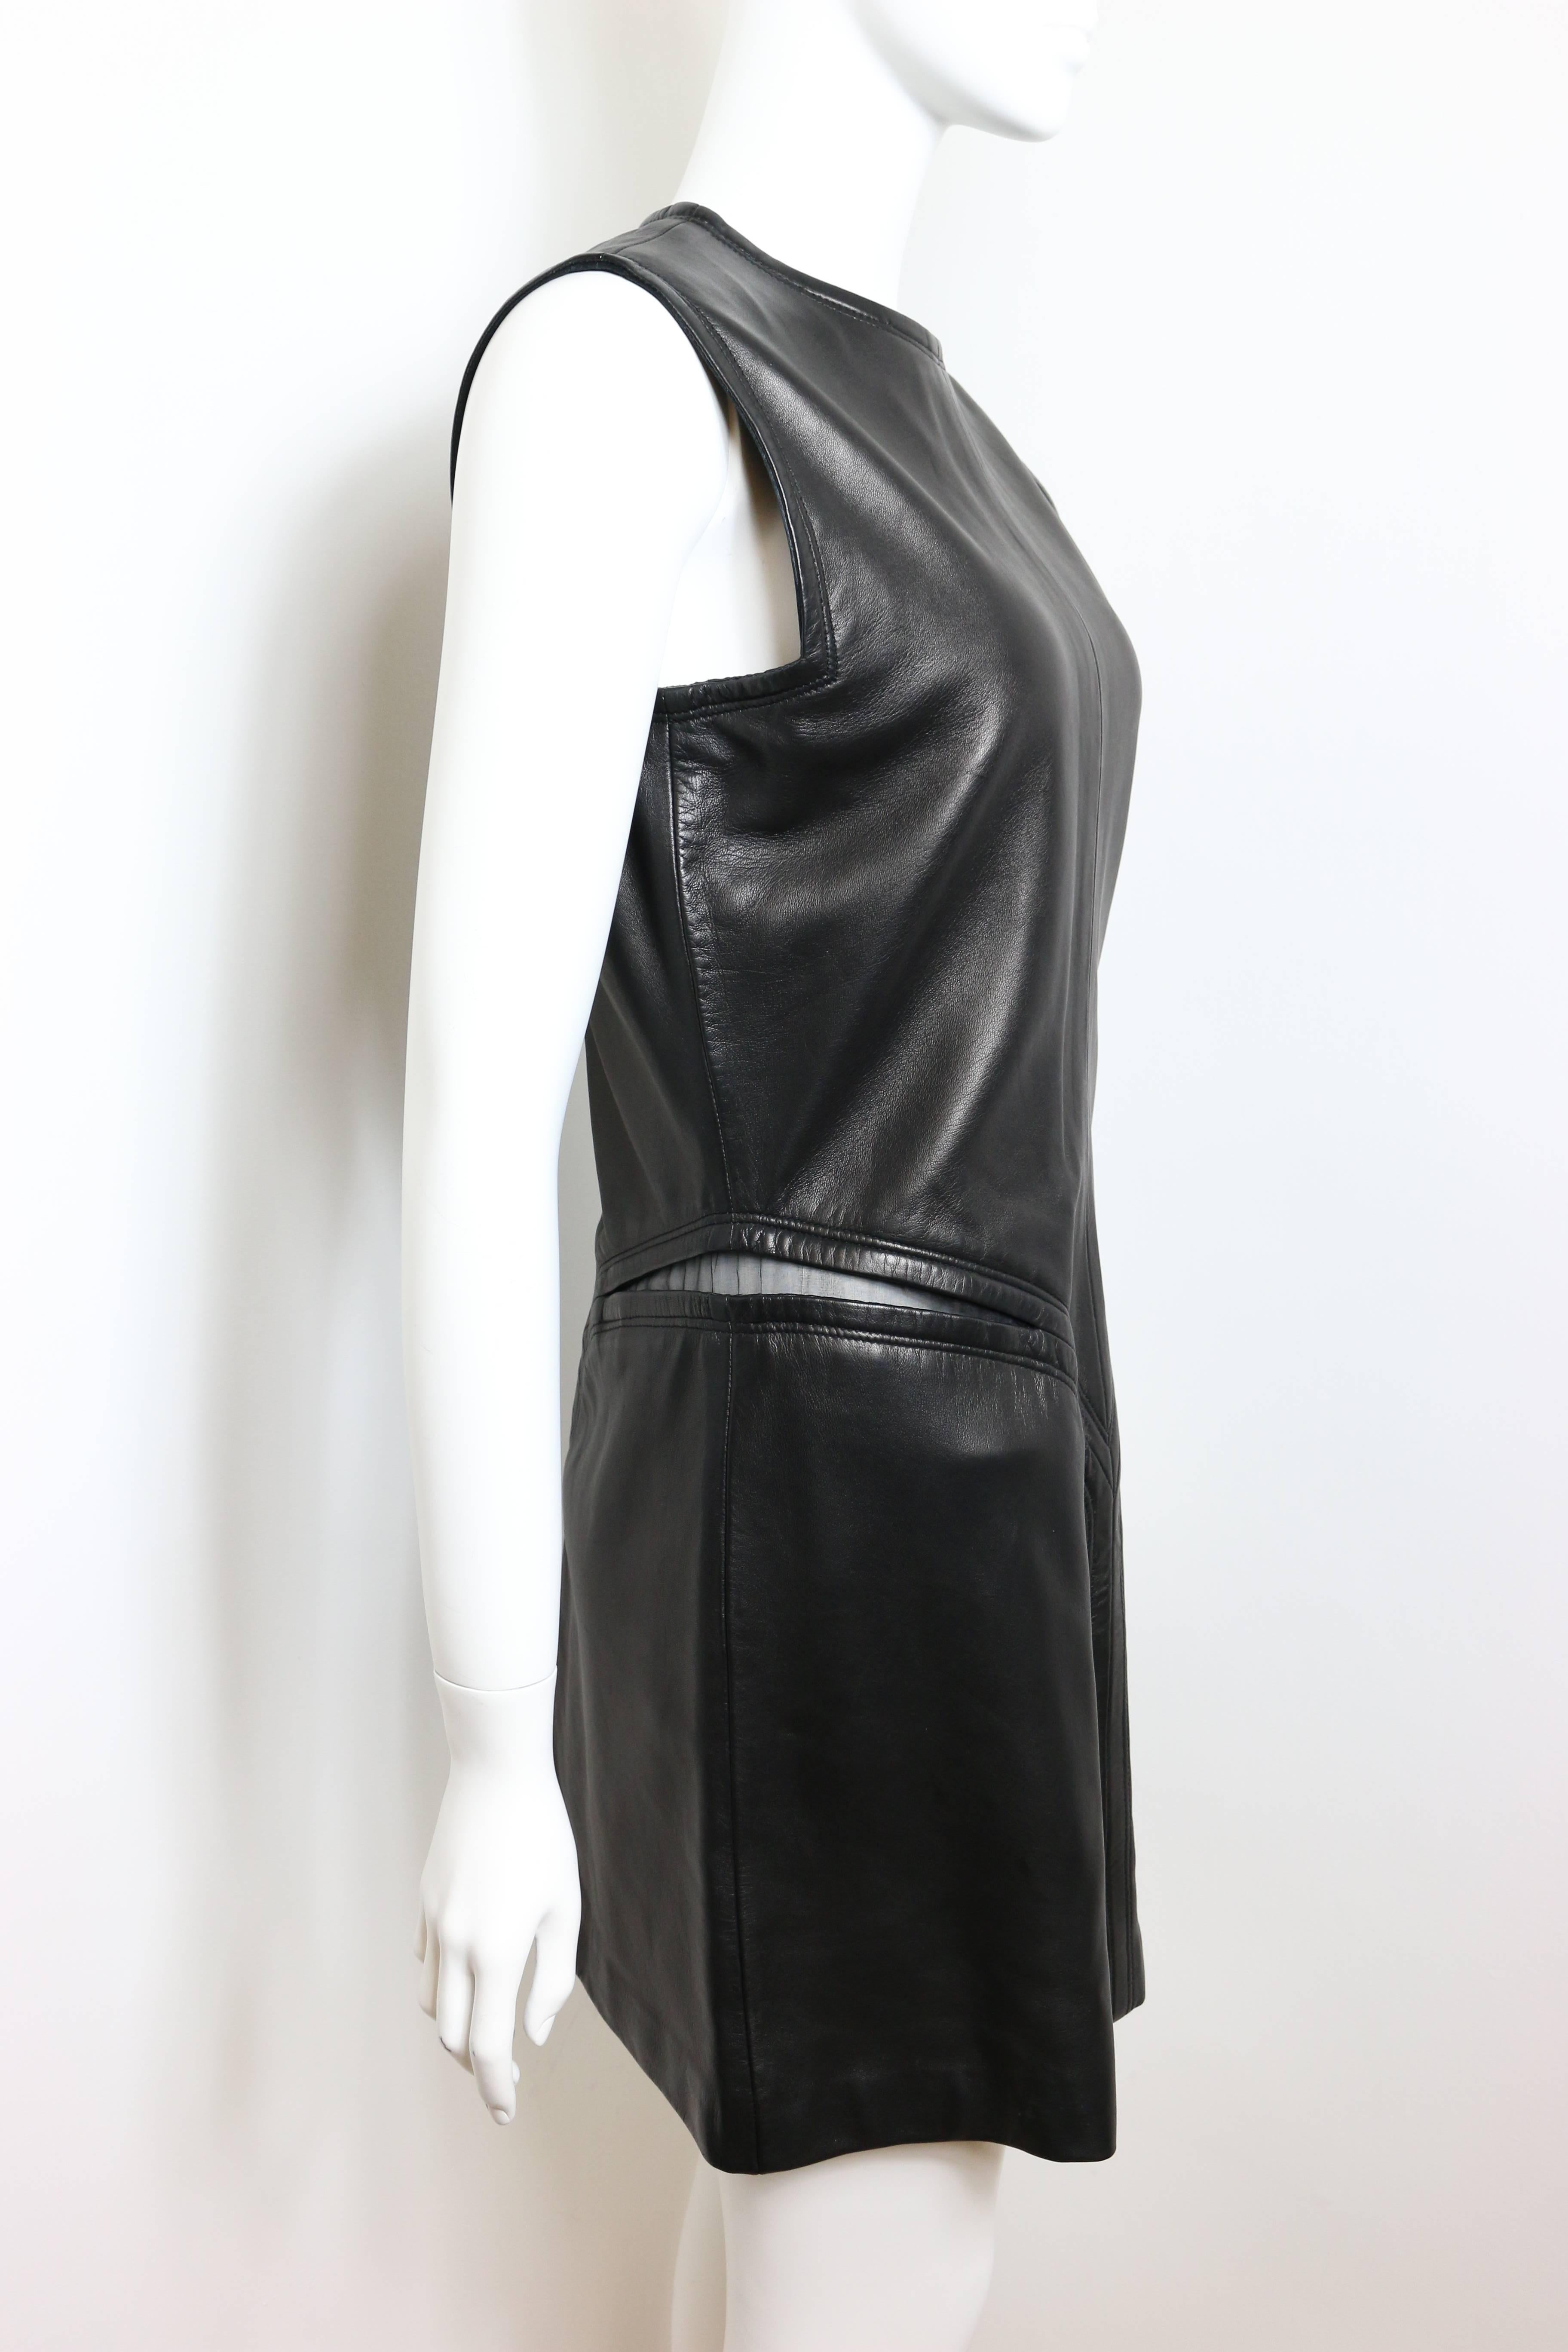 Gianni Versace Cutout Black Leather Dress  In Excellent Condition For Sale In Sheung Wan, HK